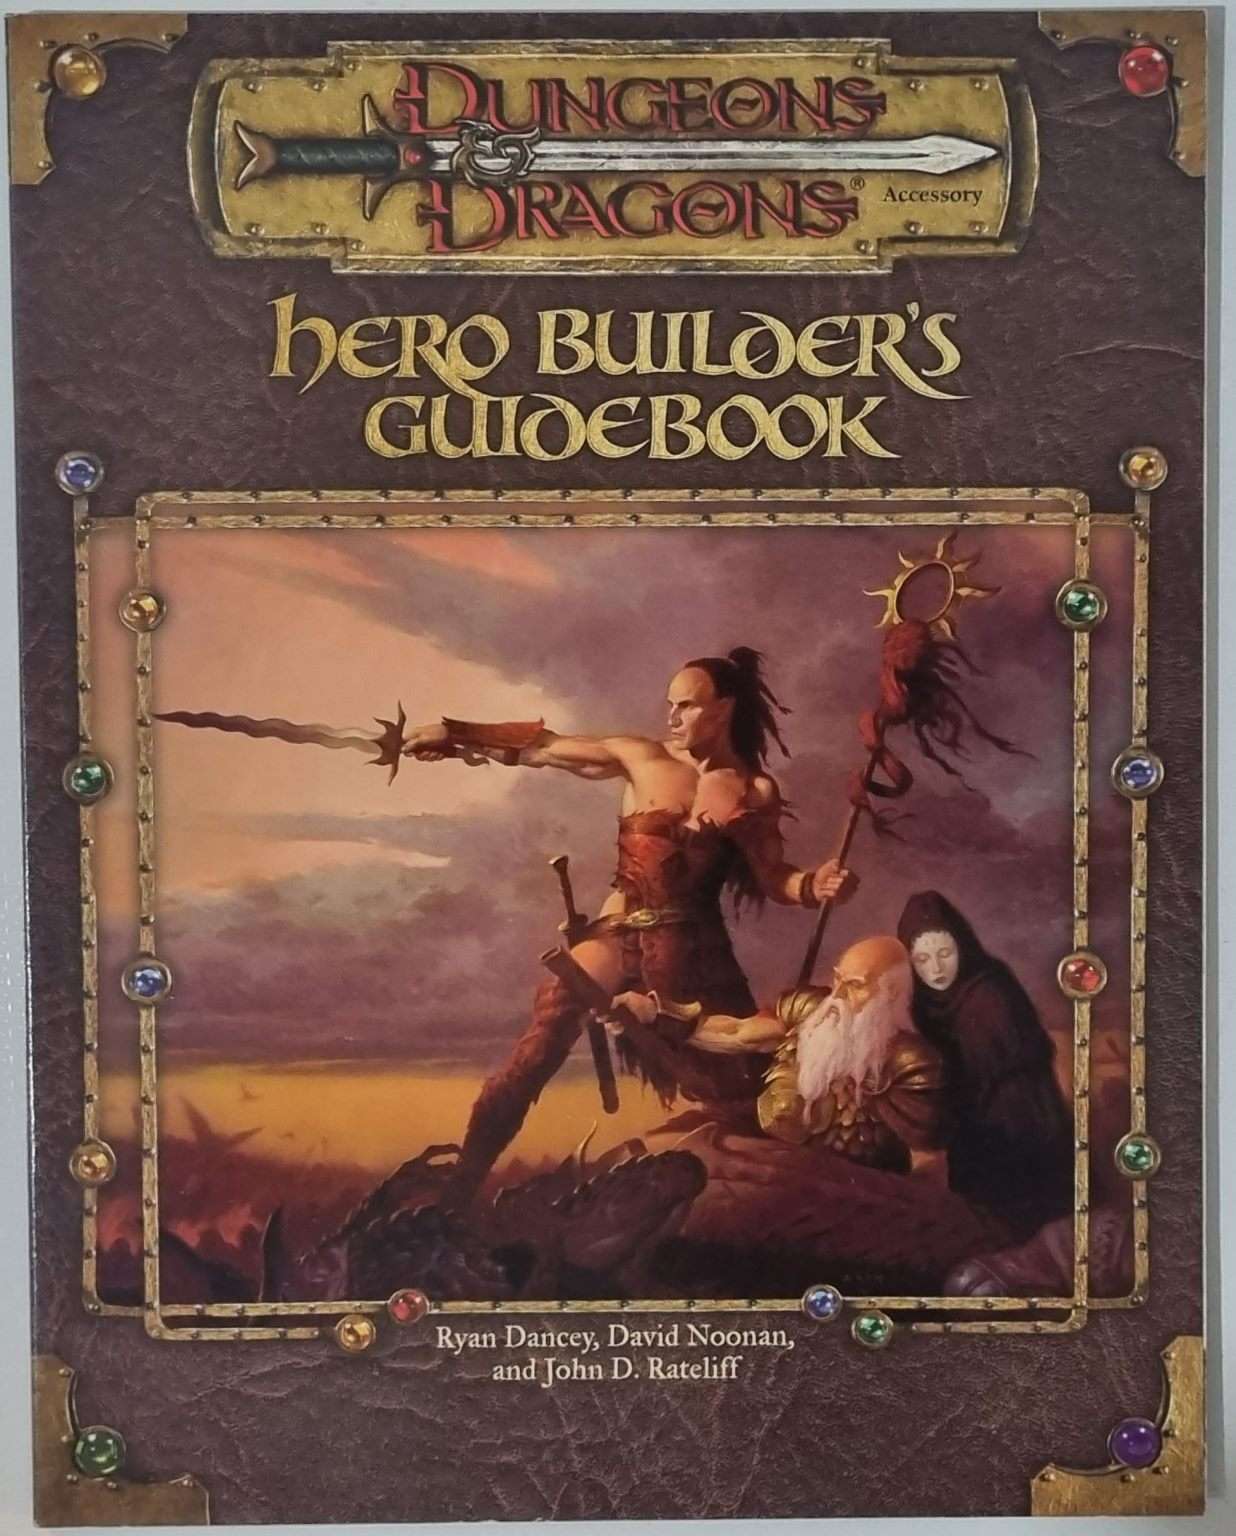 Dungeons and Dragons - Hero Builder's Guidebook 3.0 e